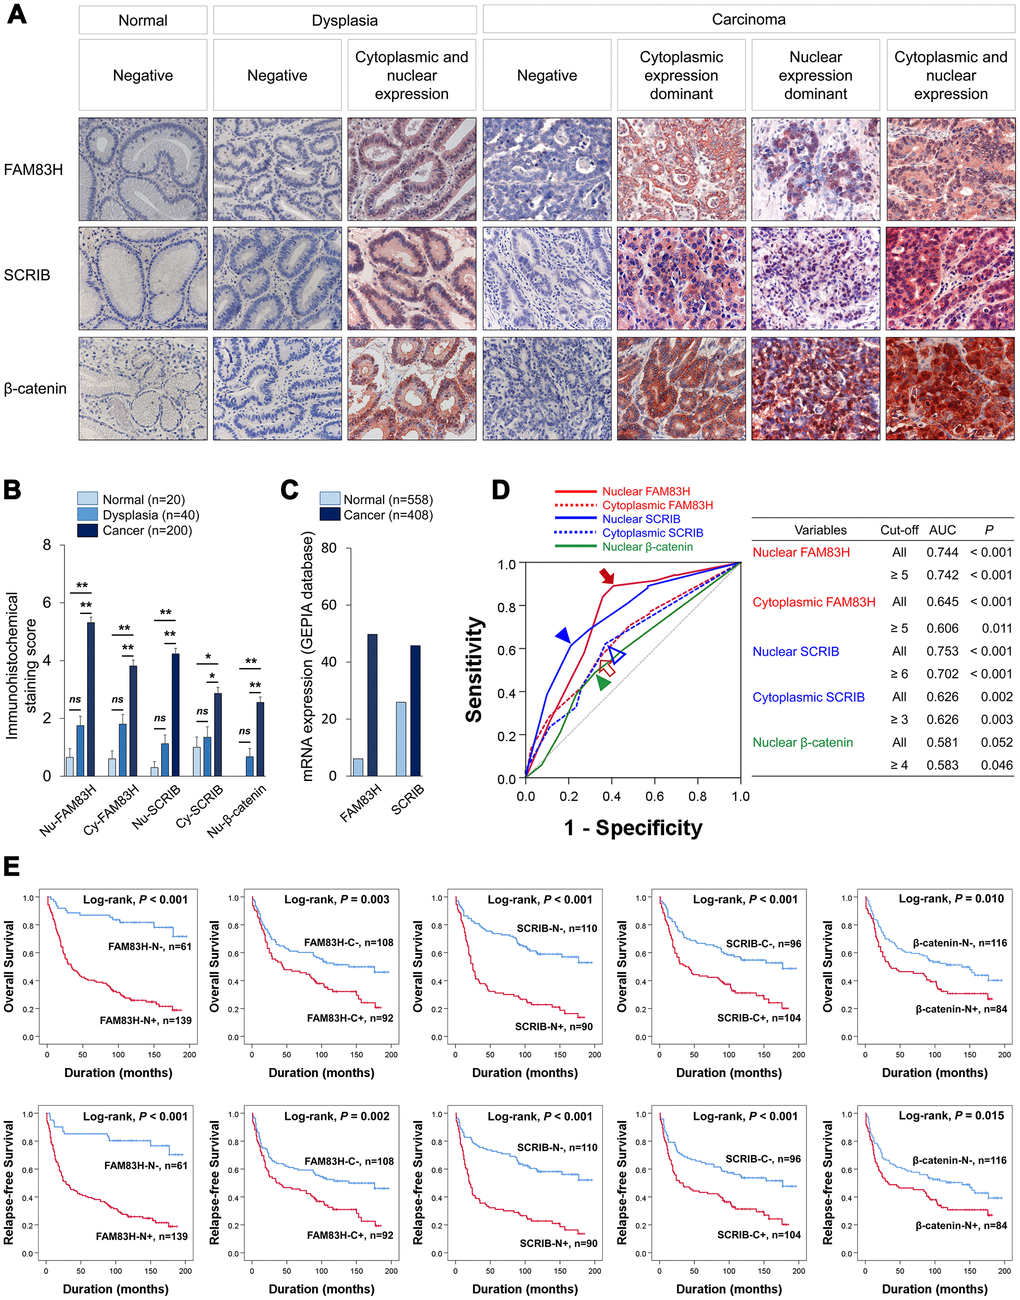 Expression and prognostic significance of the expression of FAM83H, SCRIB, and β-catenin in 200 human gastric carcinomas. (A) Immunohistochemical expression of FAM83H, SCRIB, and β-catenin in normal gastric mucosa, gastric dysplasia, and gastric carcinoma tissue. FAM83H and SCRIB are expressed in both the cytoplasm and nuclei of tumor cells. Original magnification: x400. (B) Immunohistochemical staining scores for nuclear FAM83H (FAM83H-N), cytoplasmic FAM83H (FAM83H-C), nuclear SCRIB (SCRIB-N), cytoplasmic SCRIB (SCRIB-C), and nuclear β-catenin (β-catenin-N) in 20 normal gastric mucosa, 40 gastric dysplasia, and 200 gastric carcinomas. (C) The expression of mRNA of FAM83H and SCRIB in normal gastric tissue and gastric cancers from the GEPIA database (http://gepia.cancer-pku.cn. Accessed 10 January 2020). (D) ROC curve analysis to determine cut-off points for the expression of FAM83H-N (red arrow), FAM83H-C (red empty arrow), SCRIB-N (blue arrowhead), SCRIB-C (blue empty arrowhead), and β-catenin-N (green arrowhead). The cut-off points are determined at the point of the highest area under the curve (AUC) to predict the death of gastric carcinoma patients. (E) Kaplan-Meier survival analysis of overall survival and relapse-free survival according to the FAM83H-N, FAM83H-C, SCRIB-N, SCRIB-C, and β-catenin-N expression.